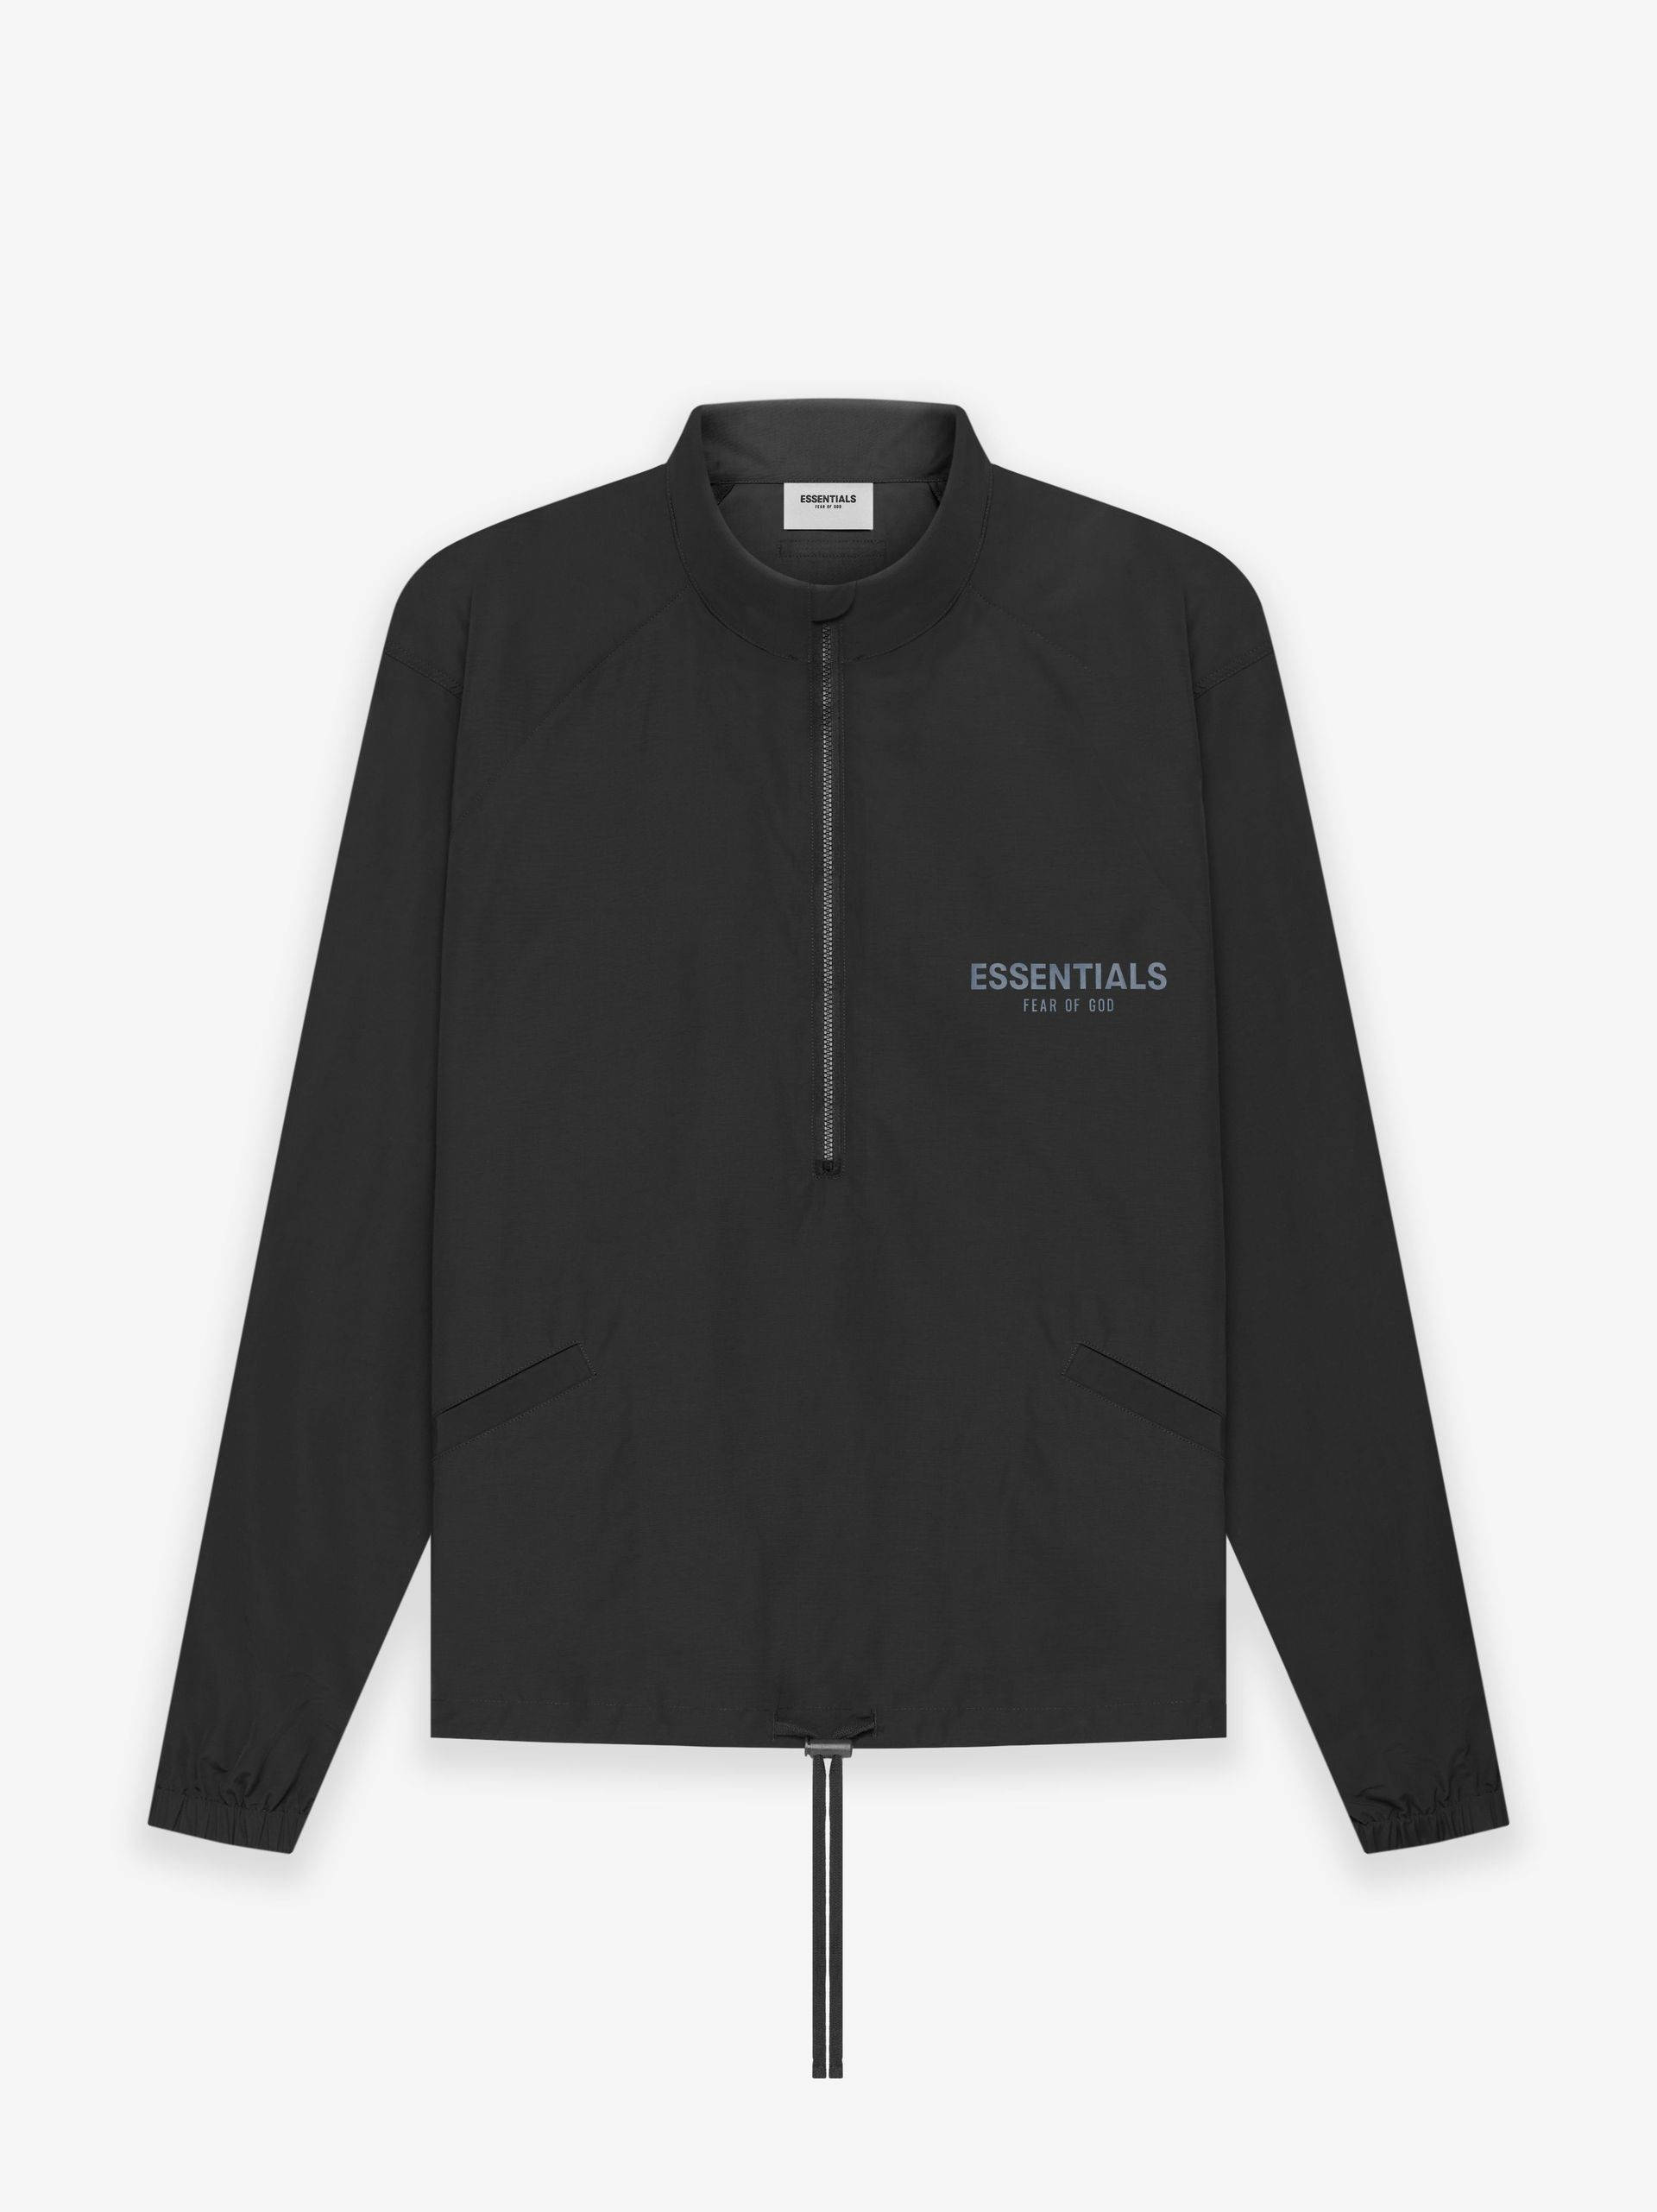 Fear of God ESSENTIALS Half Zip Track Jacket - Stretch Limo | The Sole  Supplier